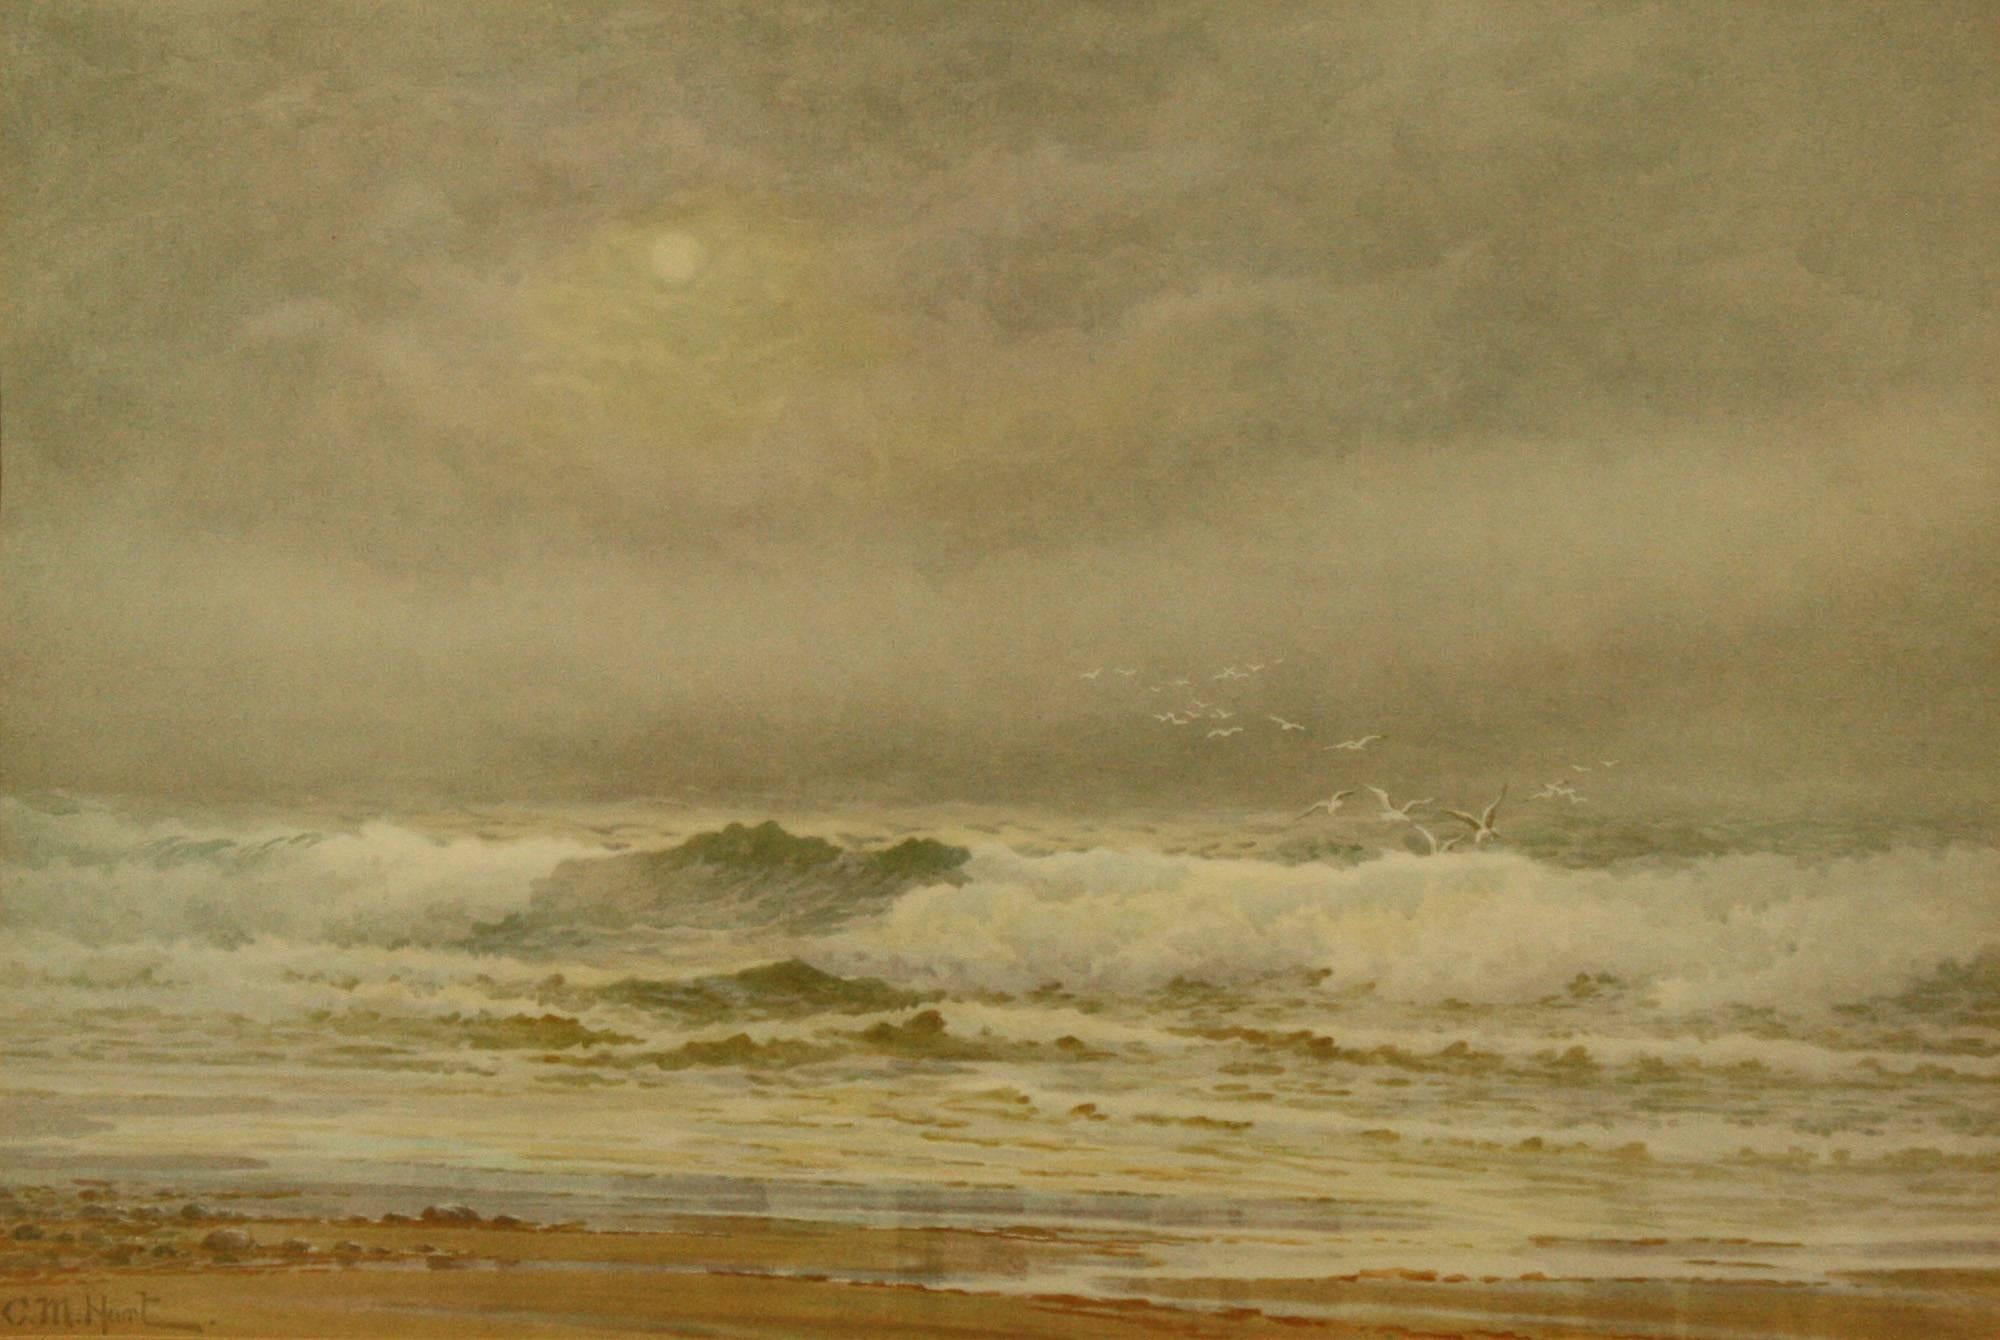 Surf and Gulls - Impressionist Painting by Claude Montague Hart